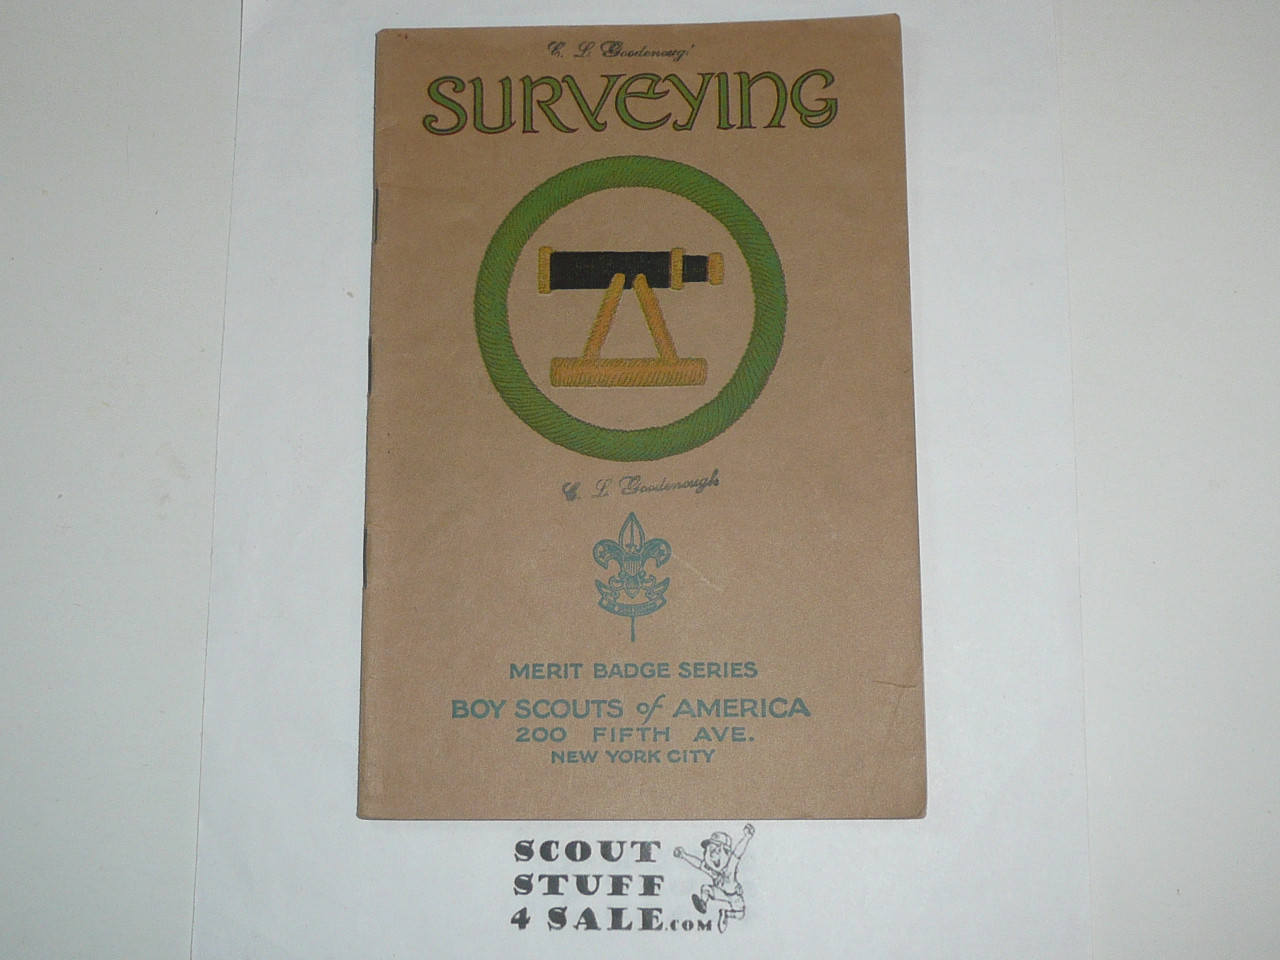 Surveying Merit Badge Pamphlet, Type 3, Tan Cover, 1925 Printing, Mint condition